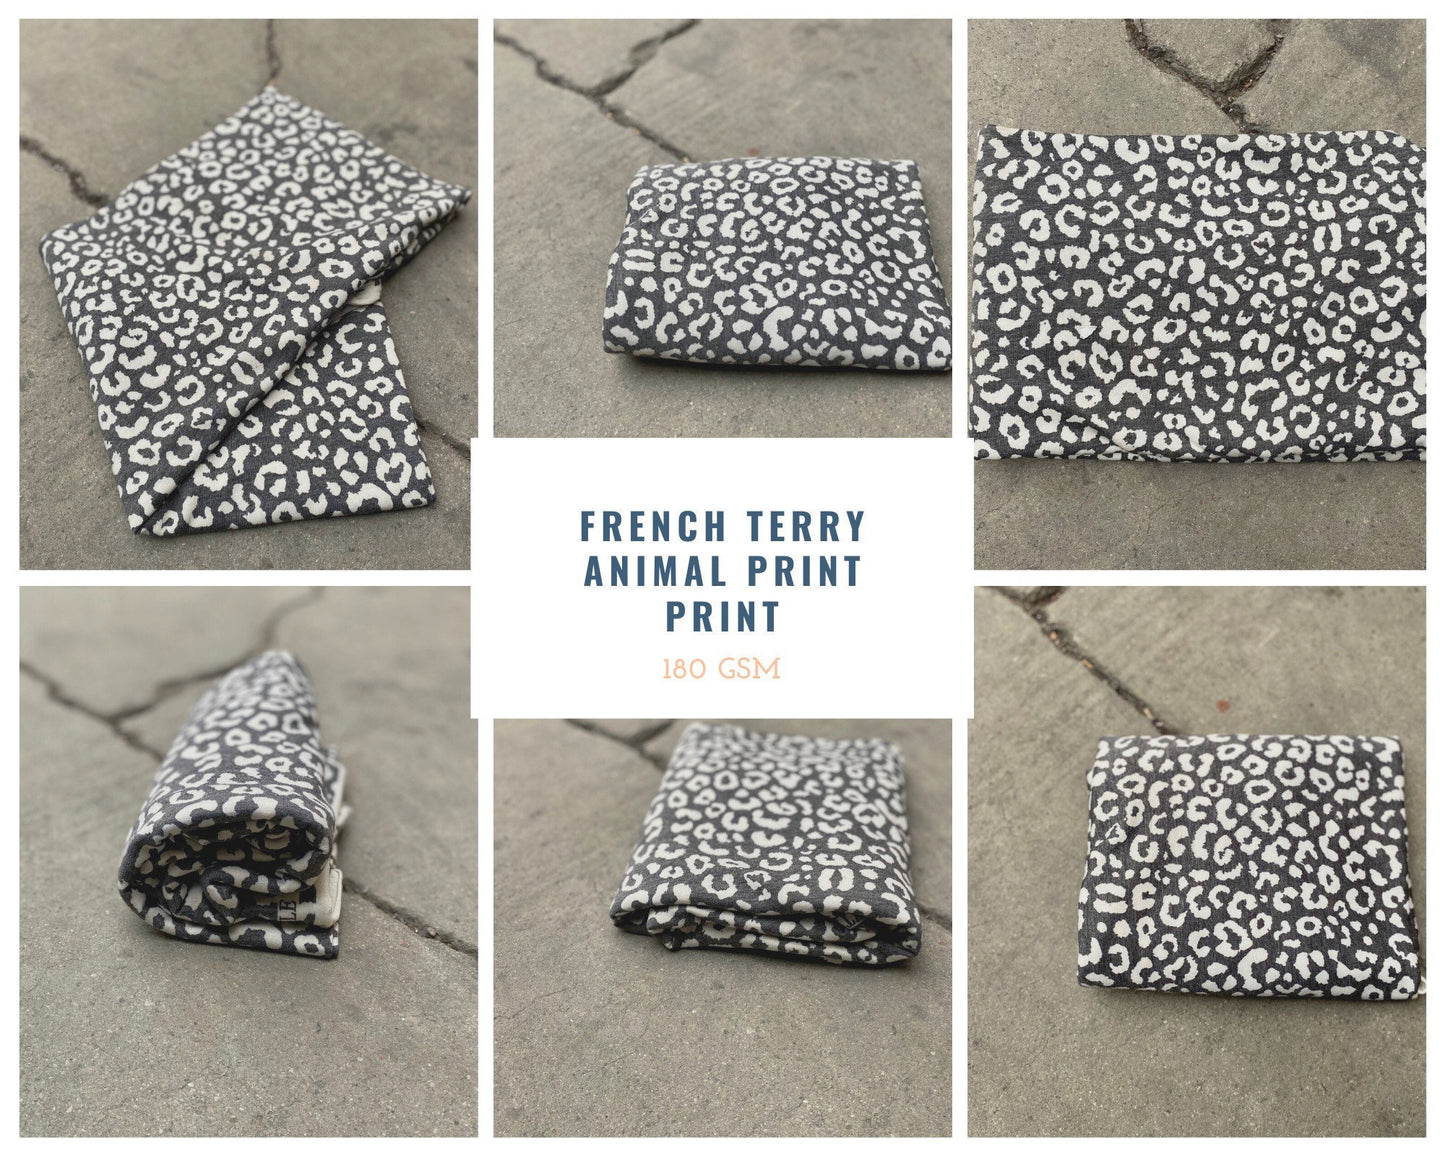 French Terry Animal Print Cheetah Leopard Print Fabric By The Yard